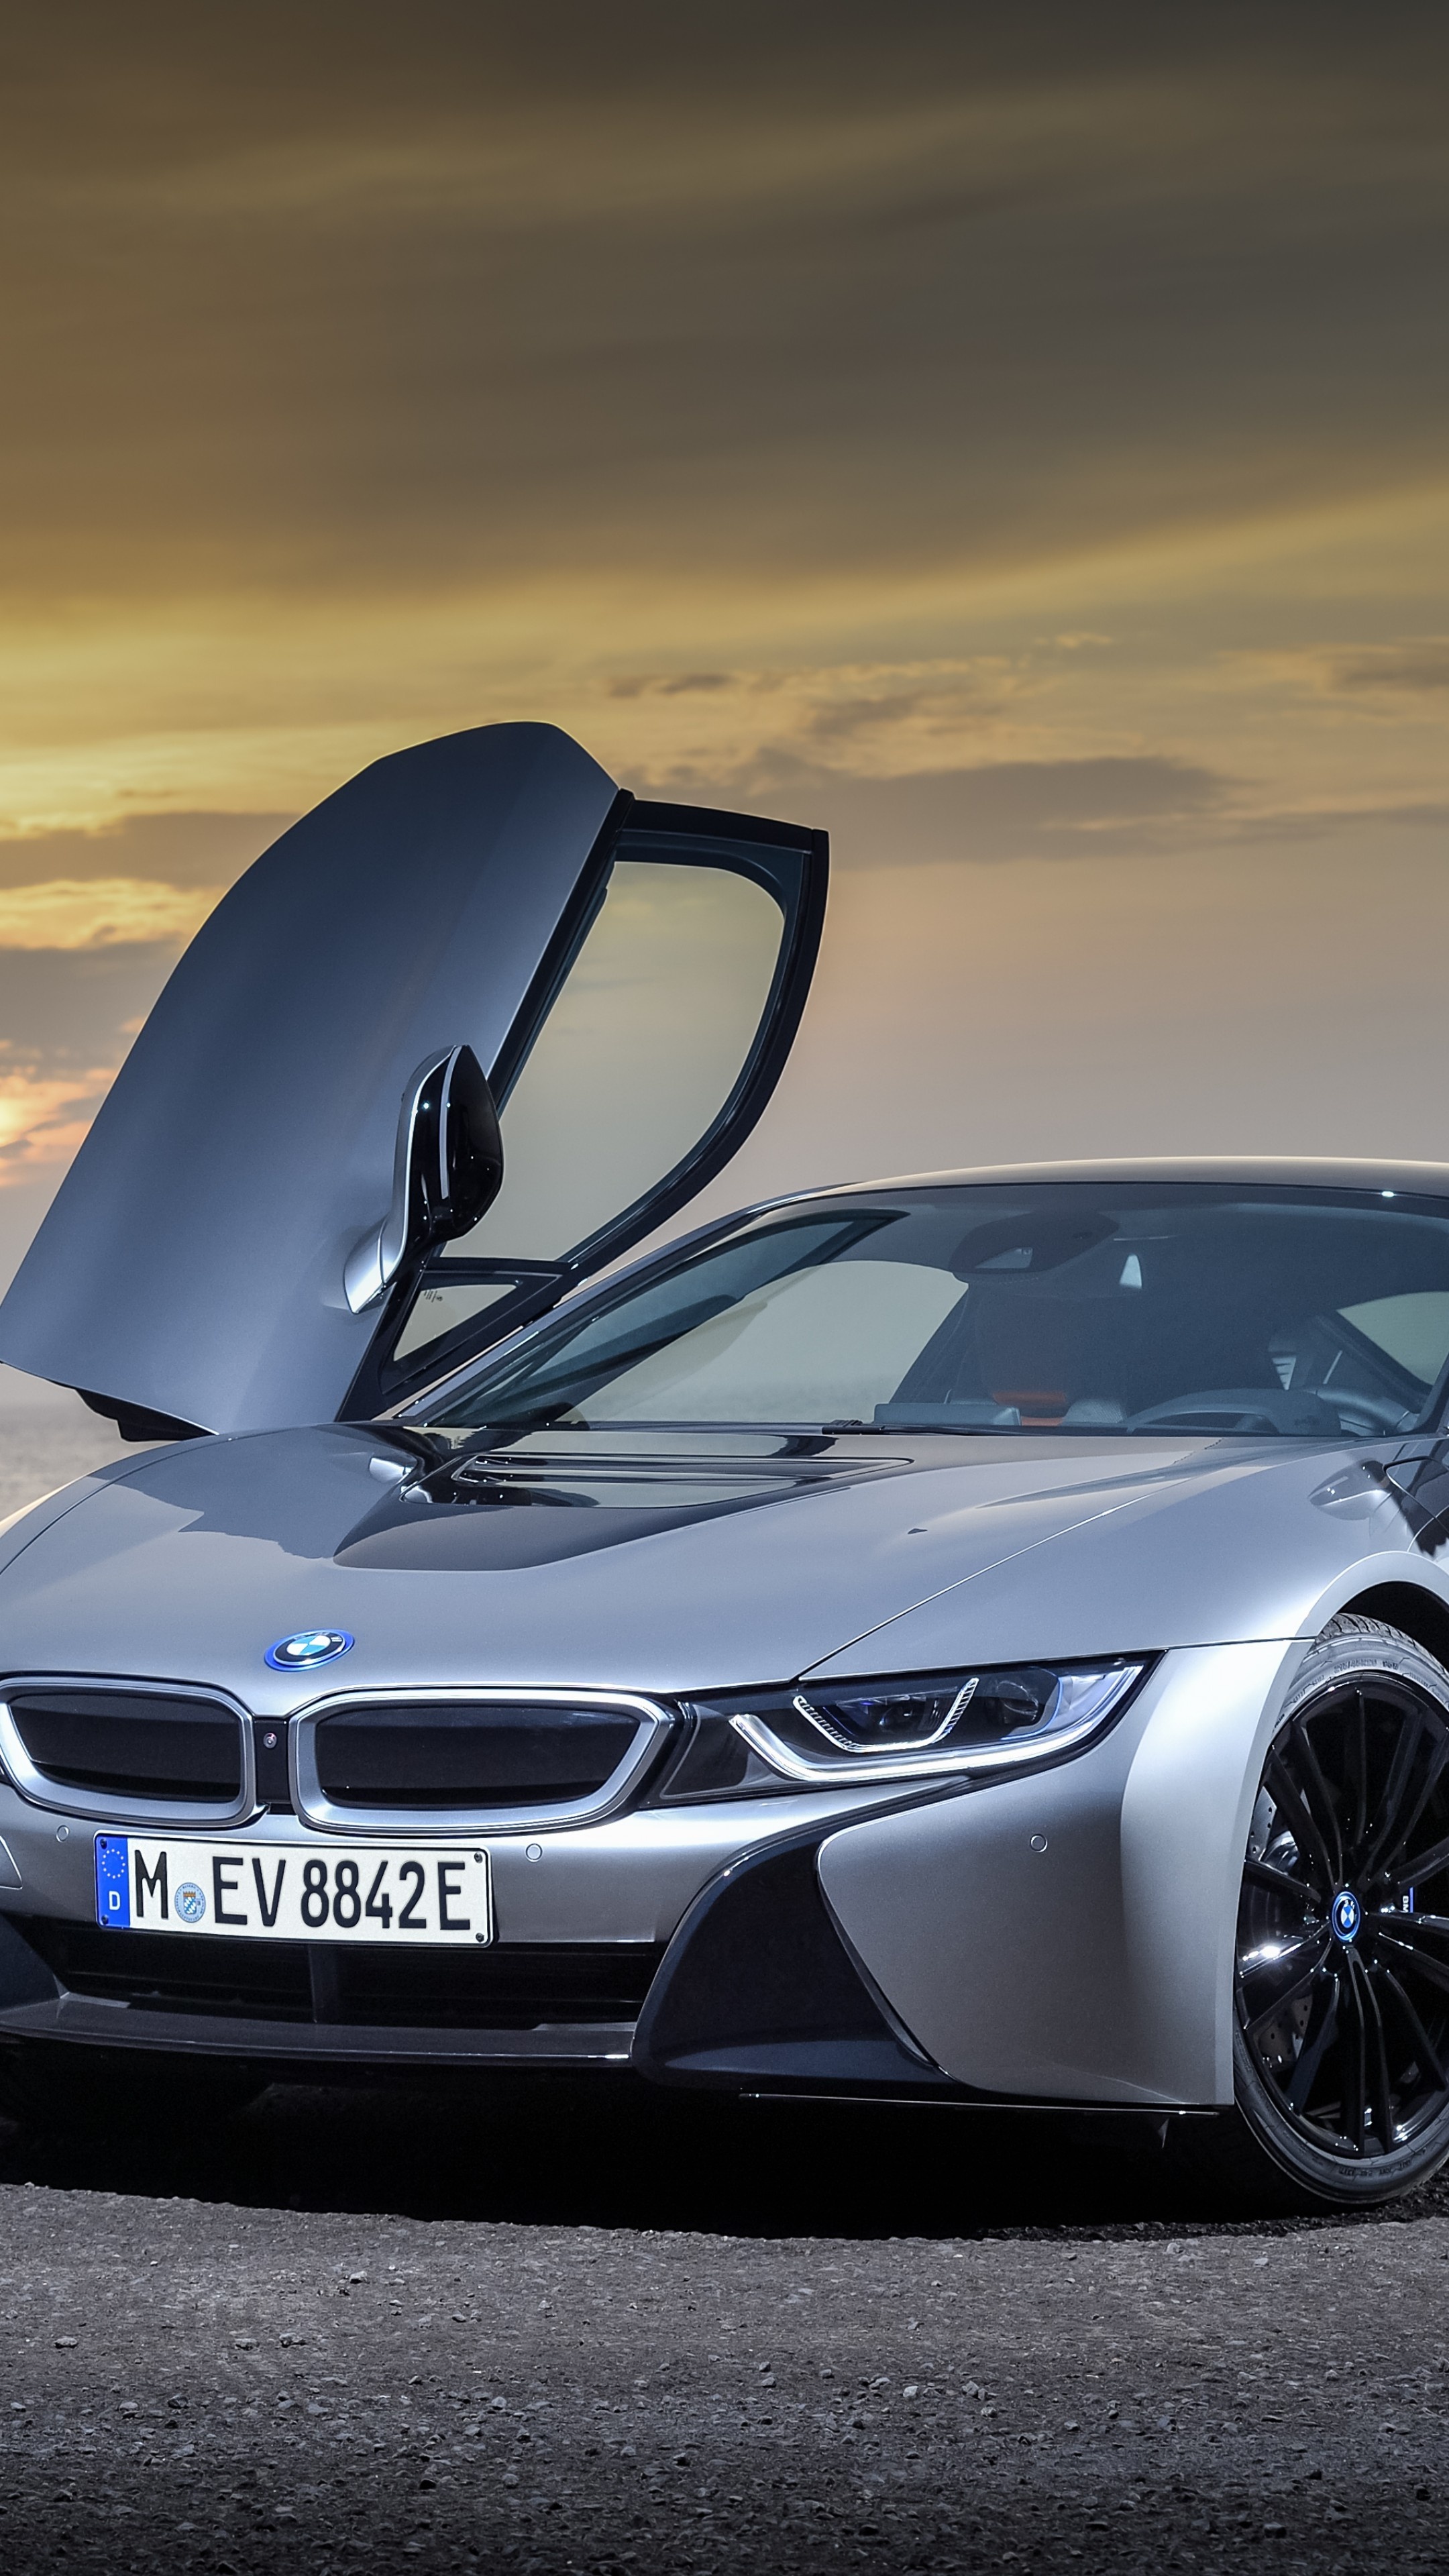 BMW i8 Roadster 2018, 5K cars & bikes wallpaper, Exquisite design, Unmatched power, Luxury in motion, 2160x3840 4K Handy